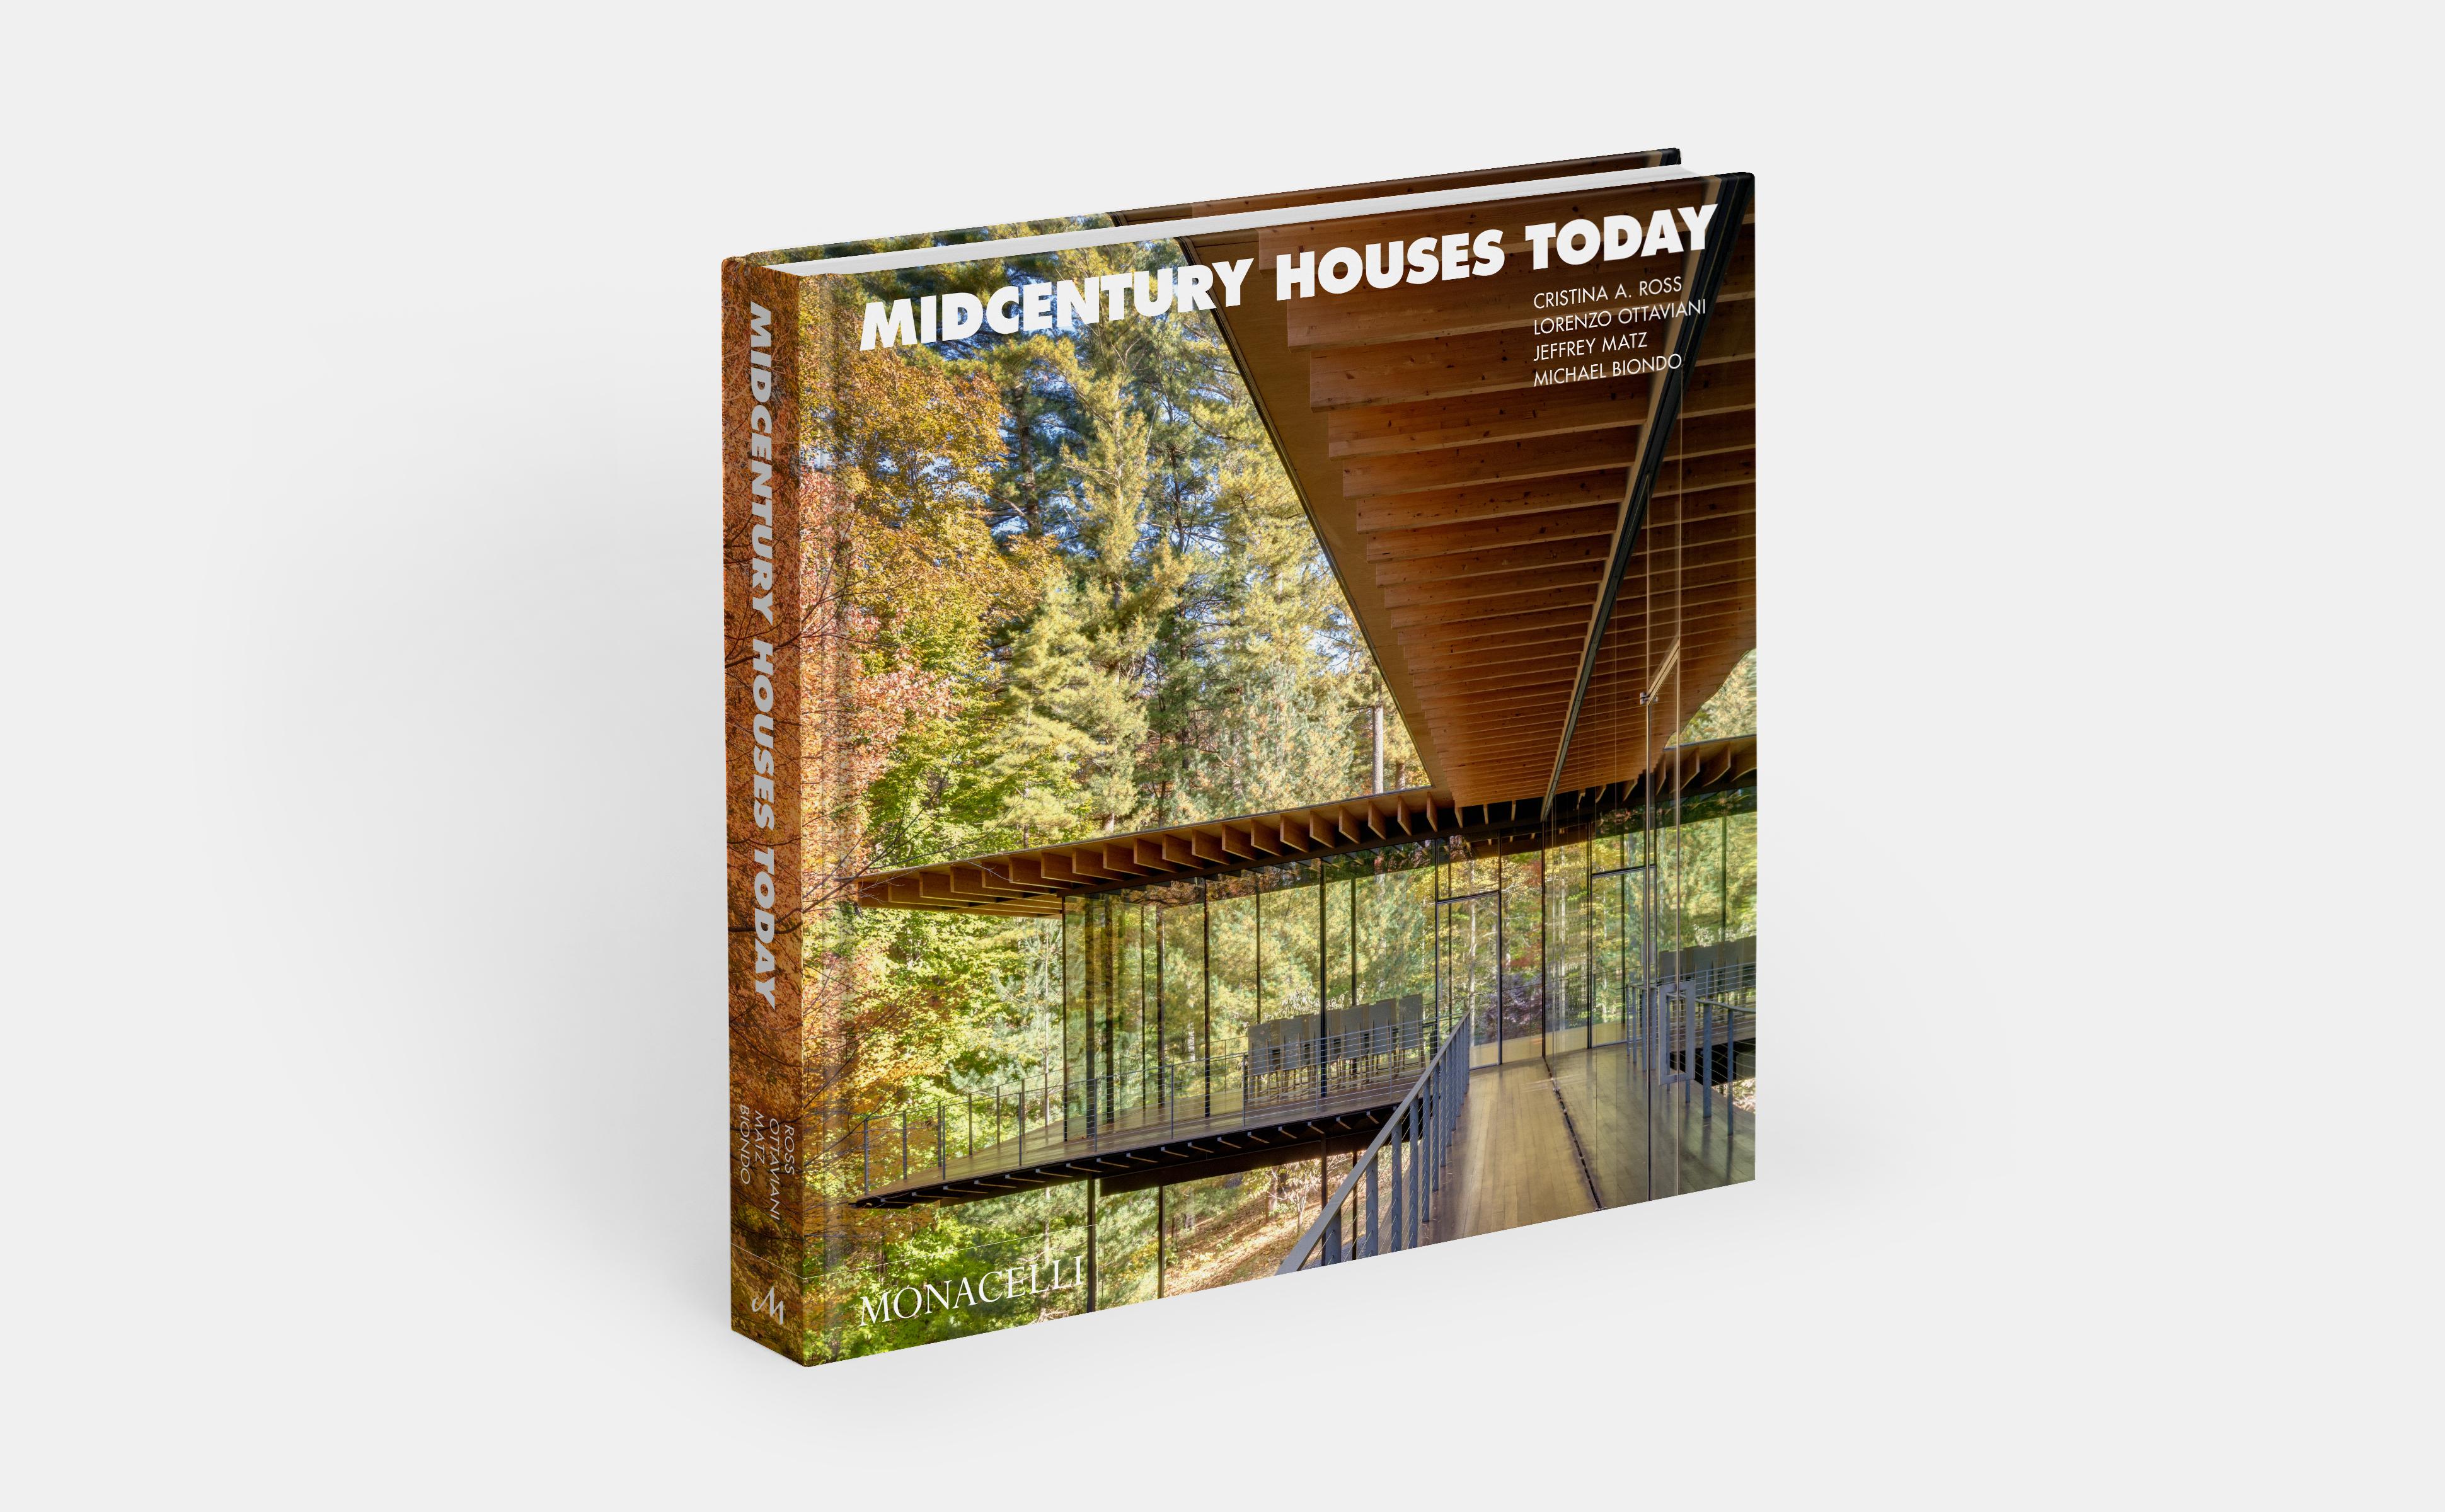 Traces the evolution of mid-century houses and demonstrates how they are experienced and lived in today

This expanded and updated edition of the 2014 classic focuses on the concentration of midcentury houses in New Canaan, Connecticut, built by